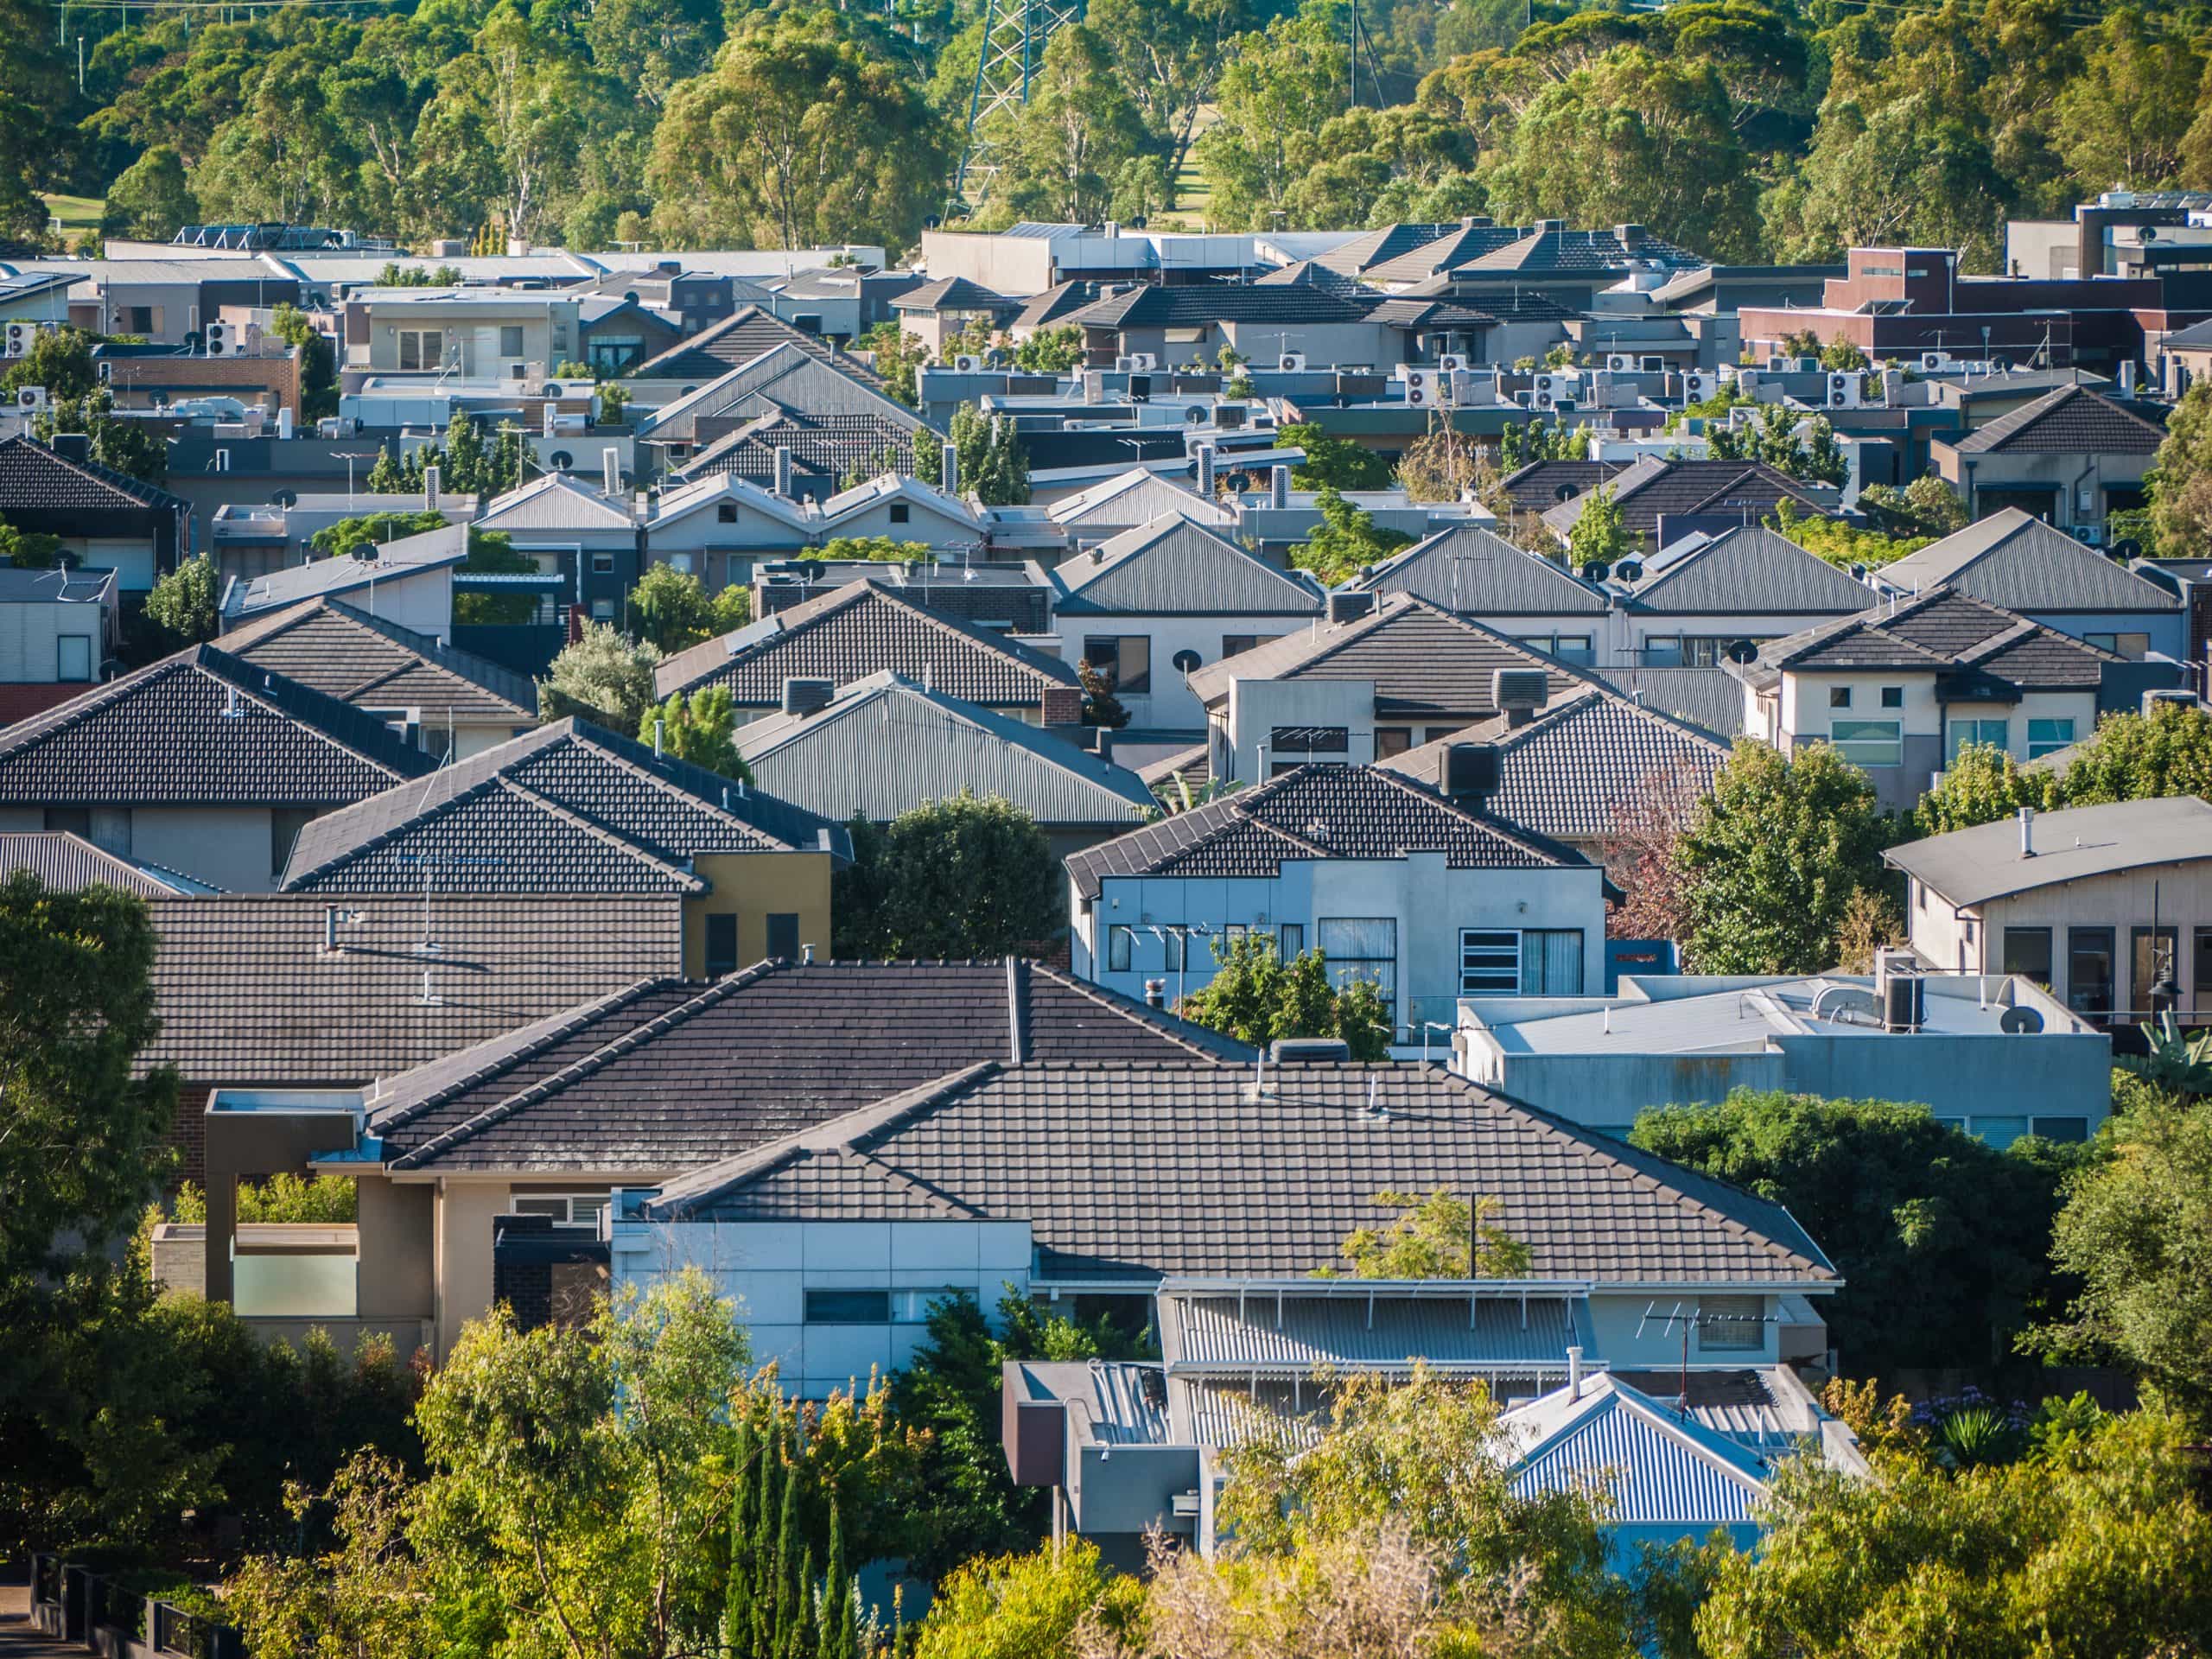 Relocation to outskirts of city after a divorce. Accompanying image: elevated view of many residential houses in suburb in Queensland, Australia.